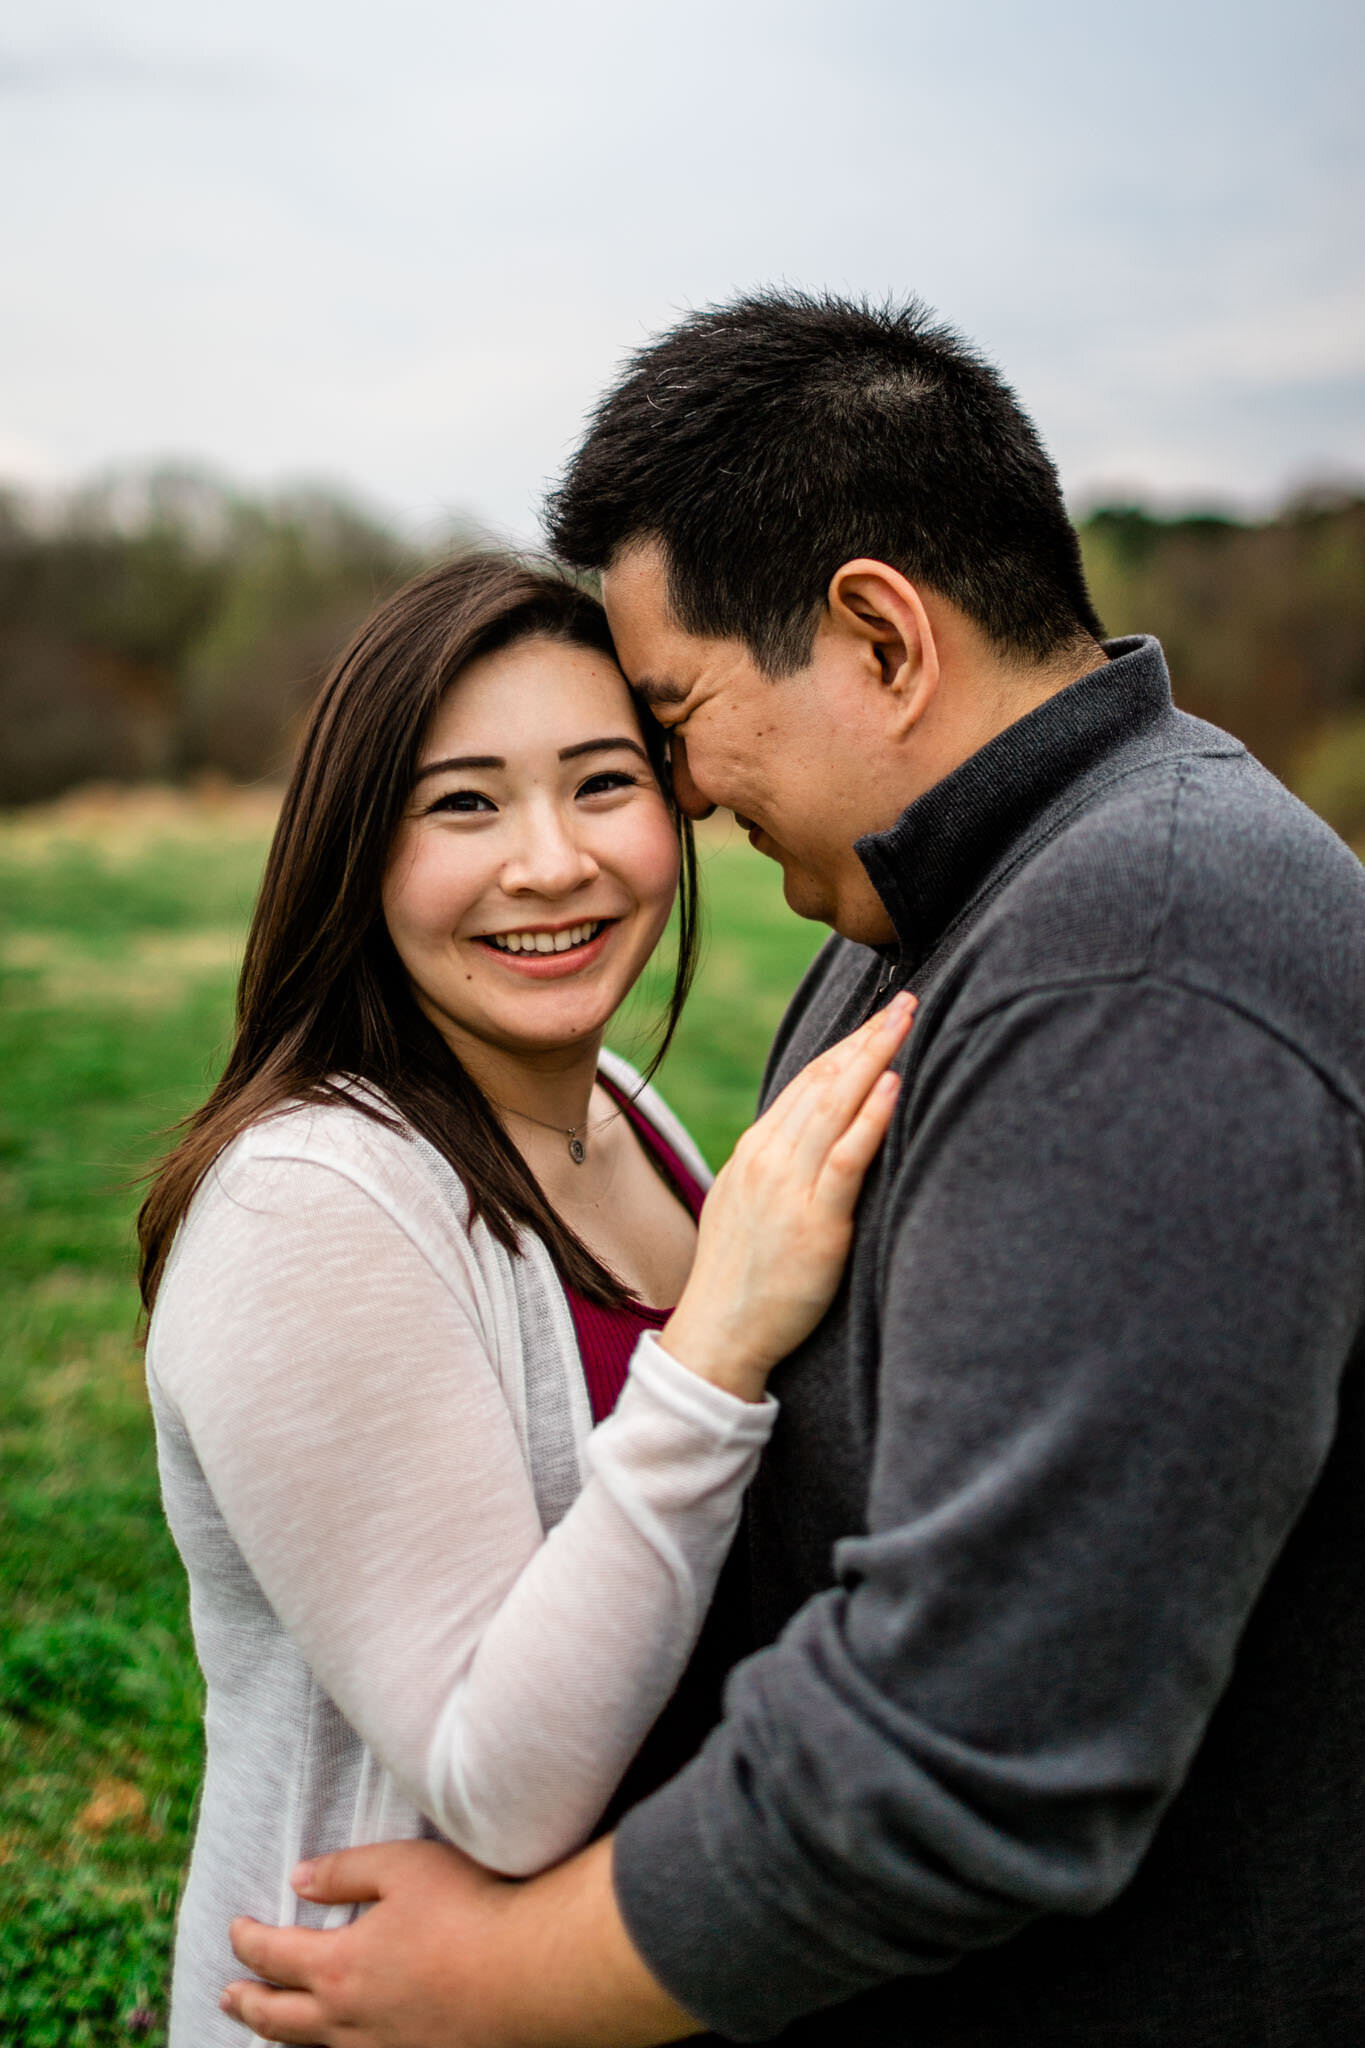 Raleigh Maternity Photographer | By G. Lin Photography | NC Museum of Art | Candid couple portrait with woman looking at camera